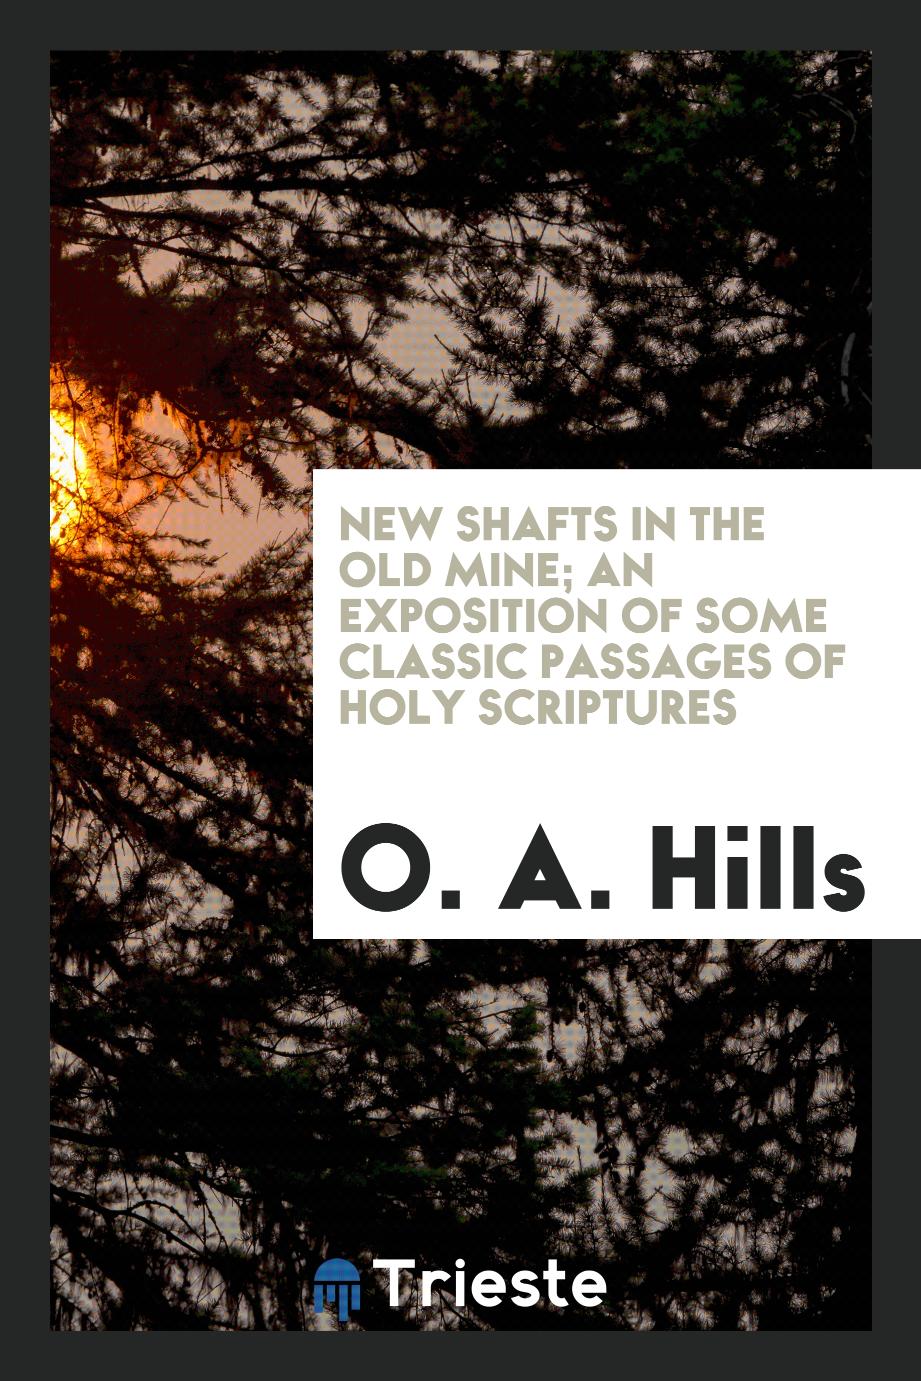 New shafts in the old mine; an exposition of some classic passages of Holy Scriptures